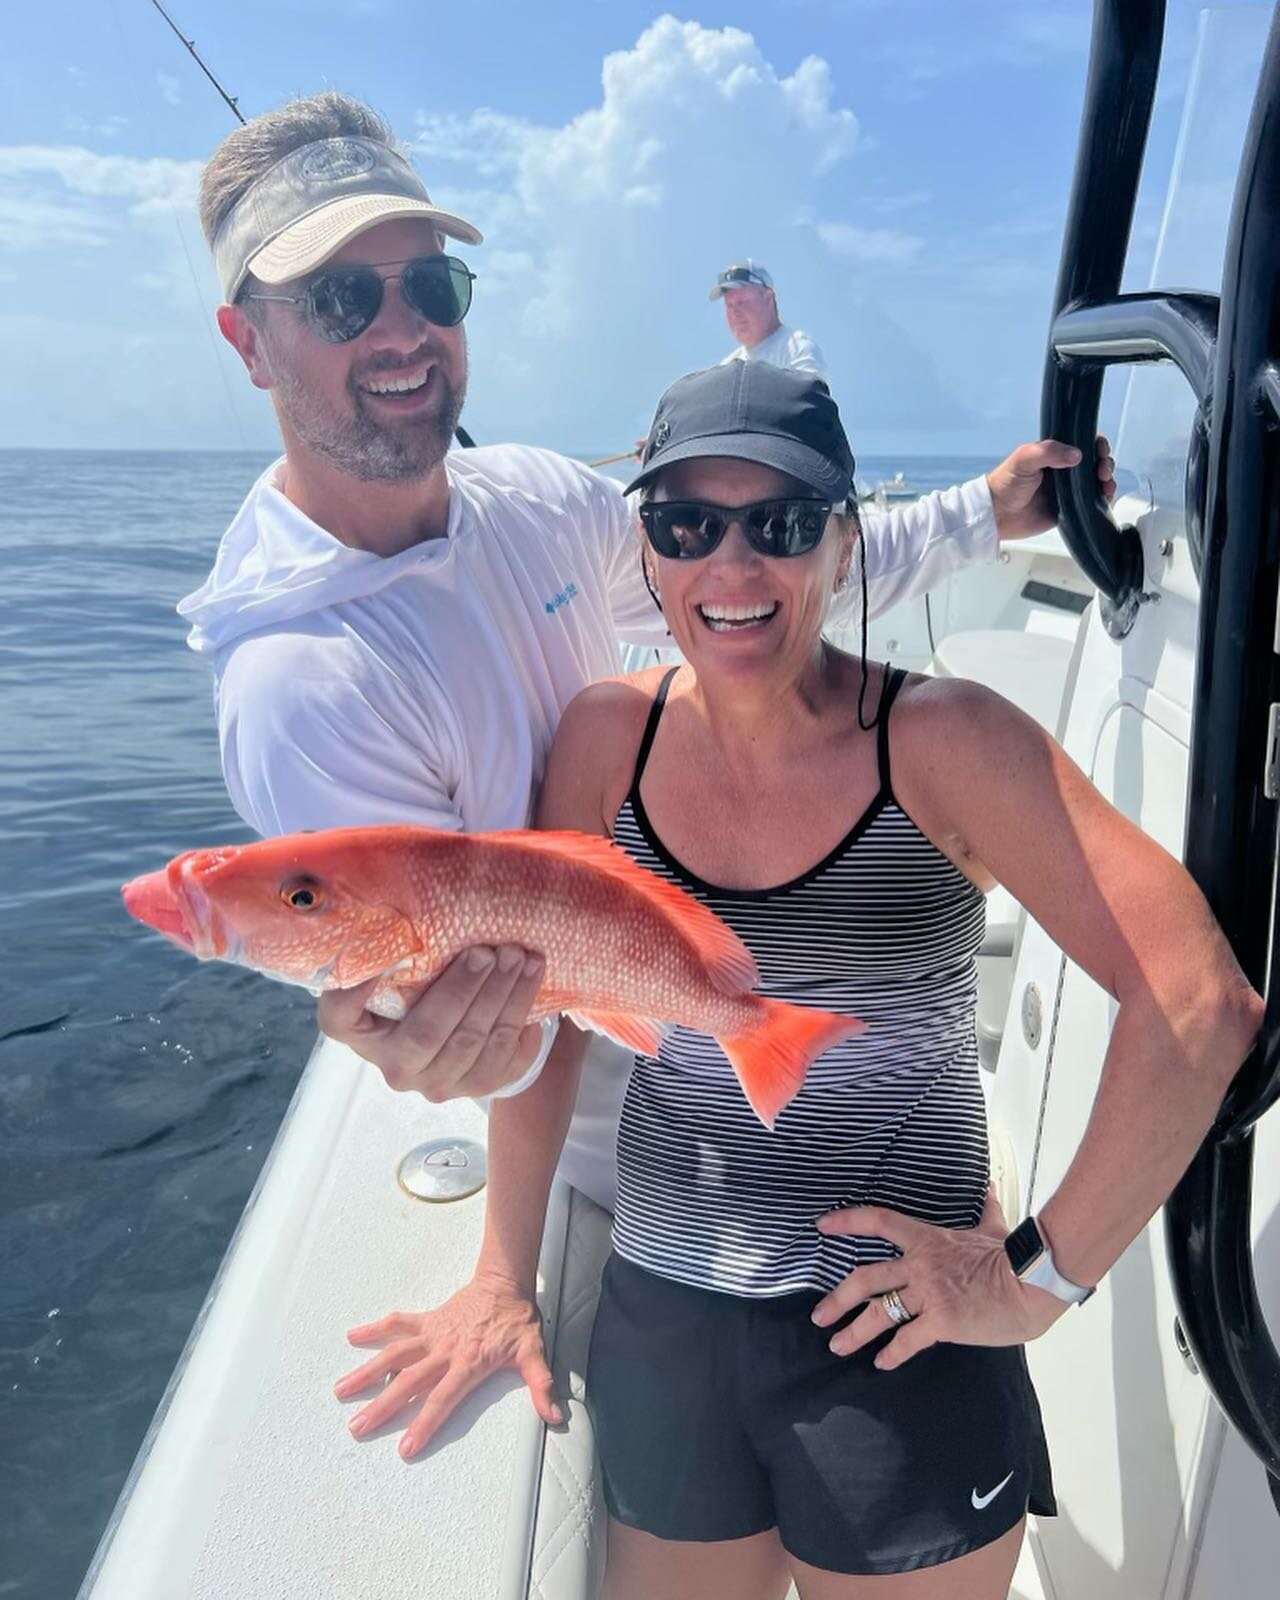 All smiles aboard @ami_offshore_fishing a great day of #fishing followed by a beautiful sunset cruise around #annamariaisland 
&bull;
Contact (941) 545-0924 for booking/info